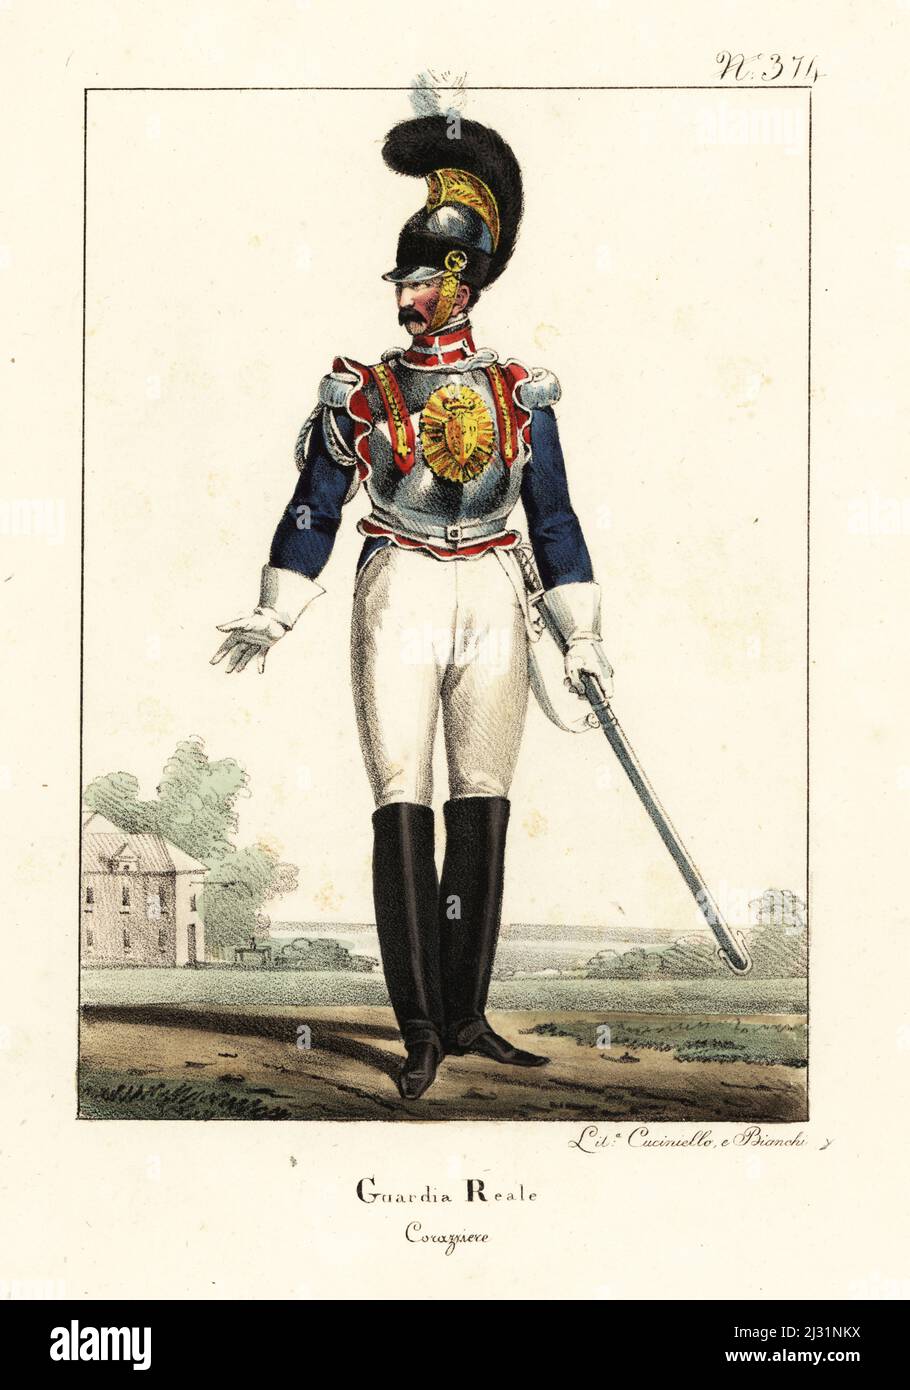 Uniform of a Cuirassier of the French Royal Guard, Bourbon Restoration. In dragoon's helmet with brush, ornate cuirasss, blue coat with silver epaulettes, breeches, boots, armed with sword. Garde Royale, Cuirassier. Handcoloured lithograph by Lorenzo Bianchi and Domenico Cuciniello after Hippolyte Lecomte from Costumi civili e militari della monarchia francese dal 1200 al 1820, Naples, 1825. Italian edition of Lecomte’s Civilian and military costumes of the French monarchy from 1200 to 1820. Stock Photo